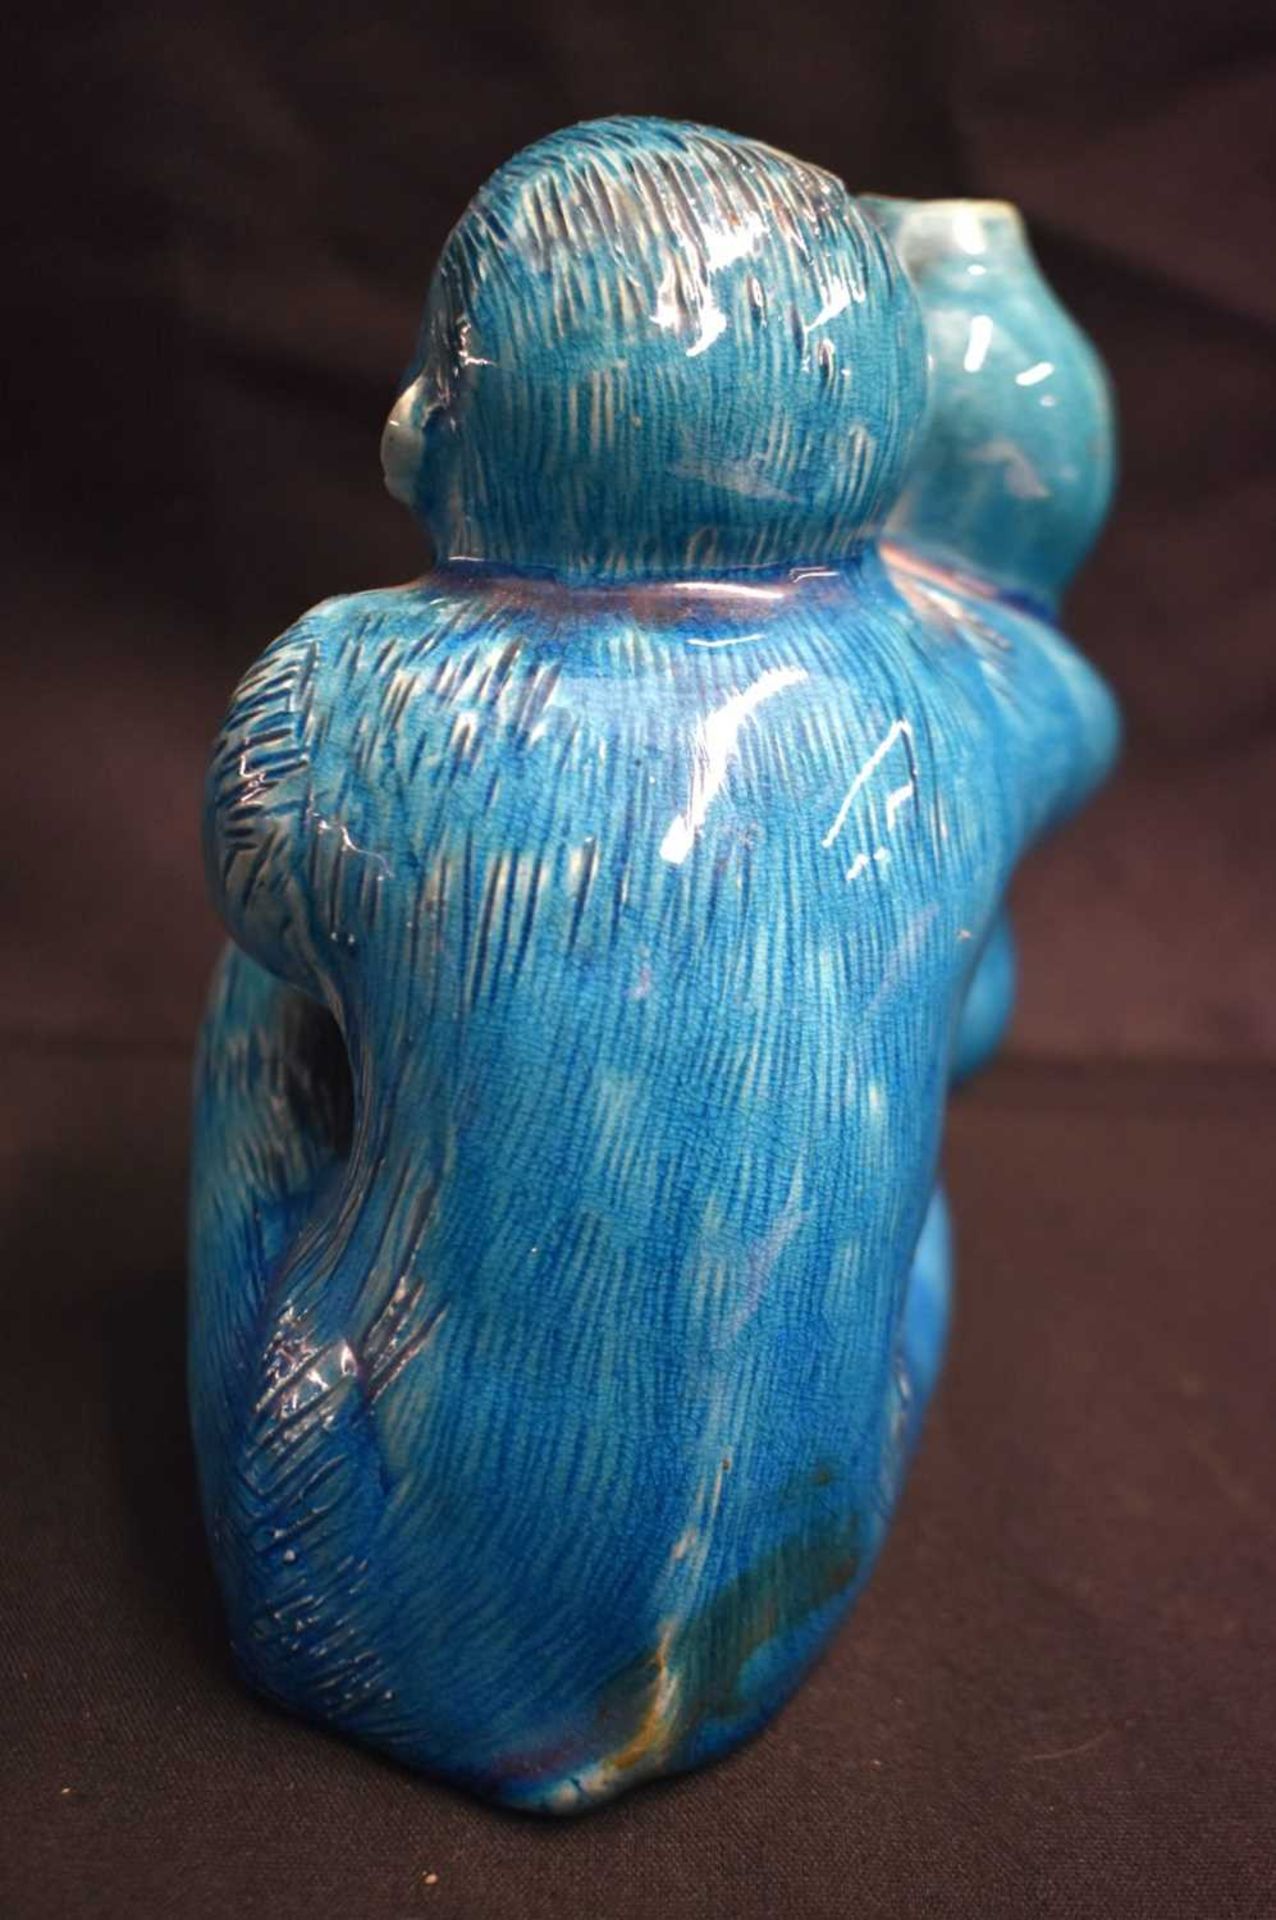 AN UNUSUAL 19TH CENTURY CHINESE BLUE GLAZED PORCELAIN MONKEY GOURD VASE or possibly Burmantofts. - Image 4 of 6